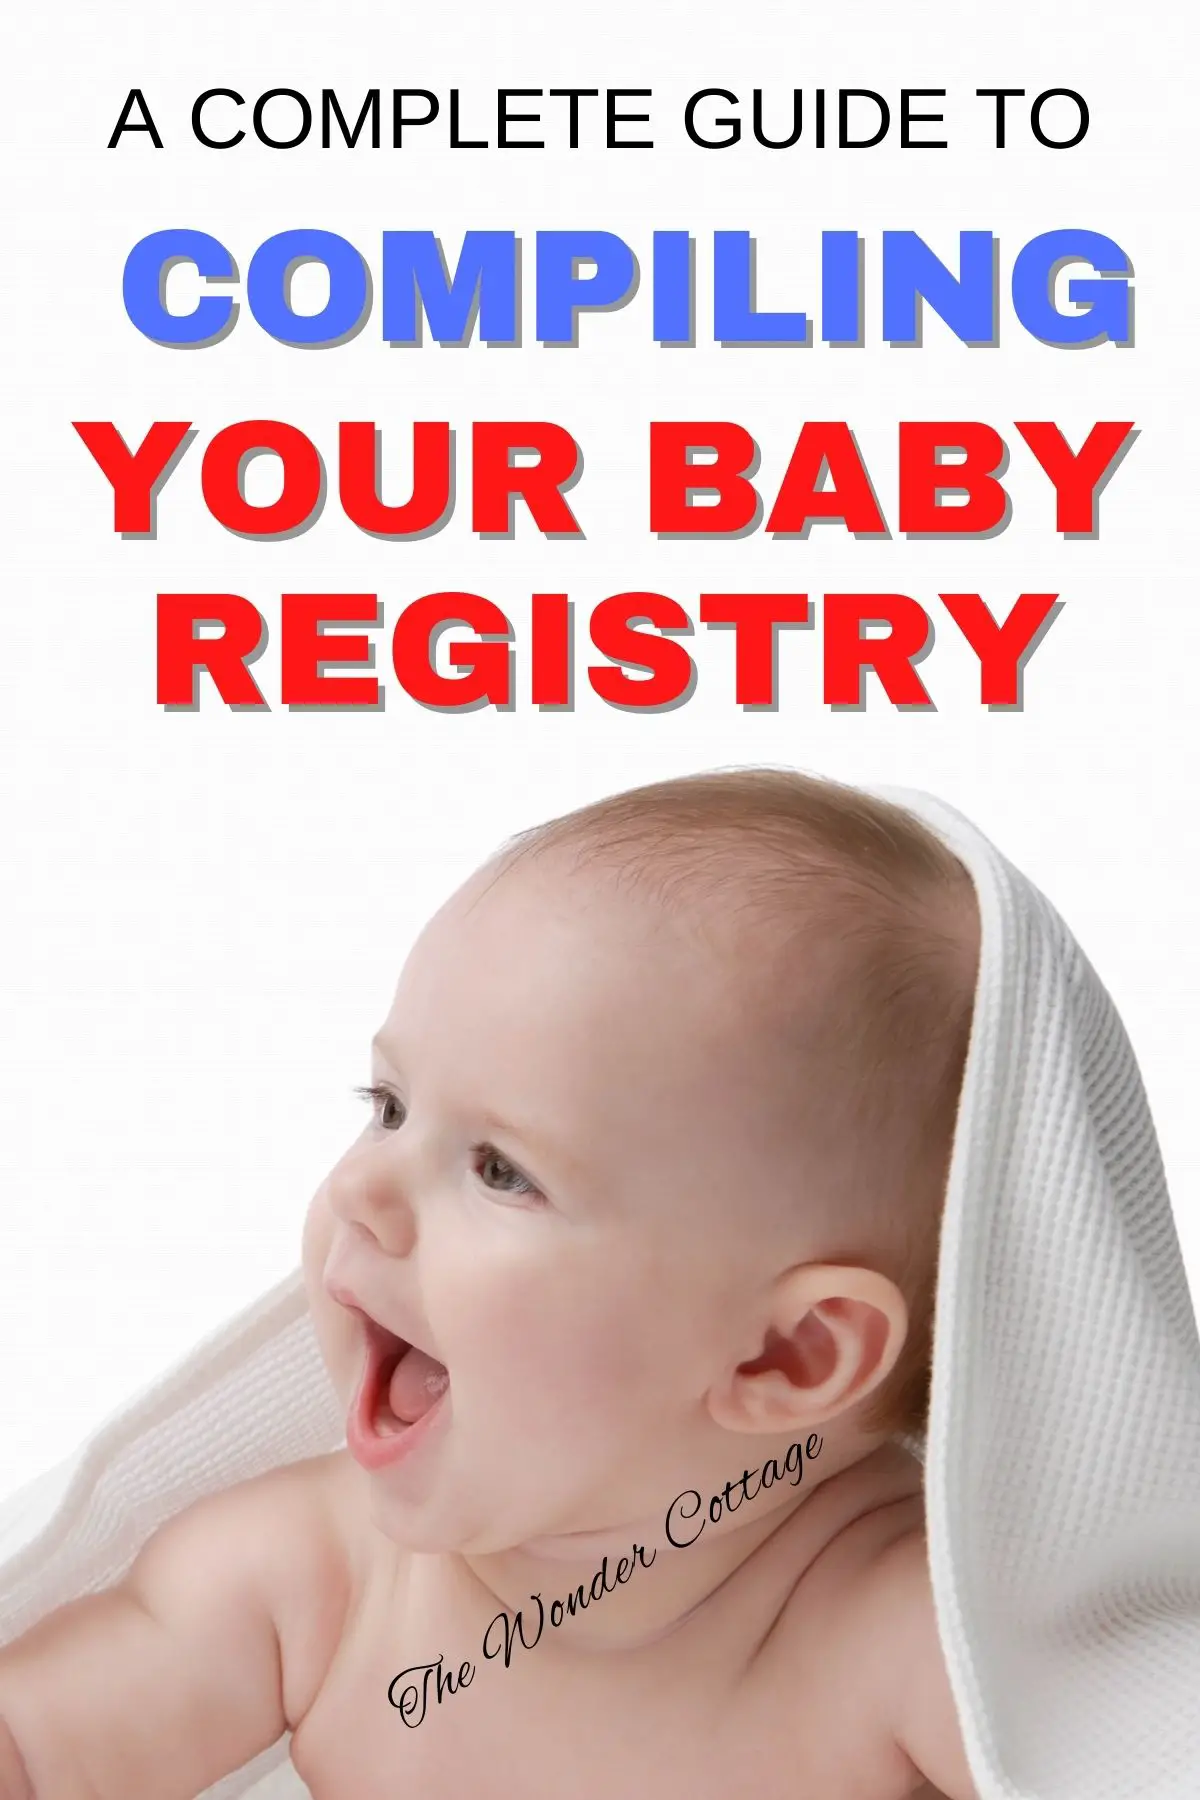 A Complete Guide To Compiling Your Baby Registry